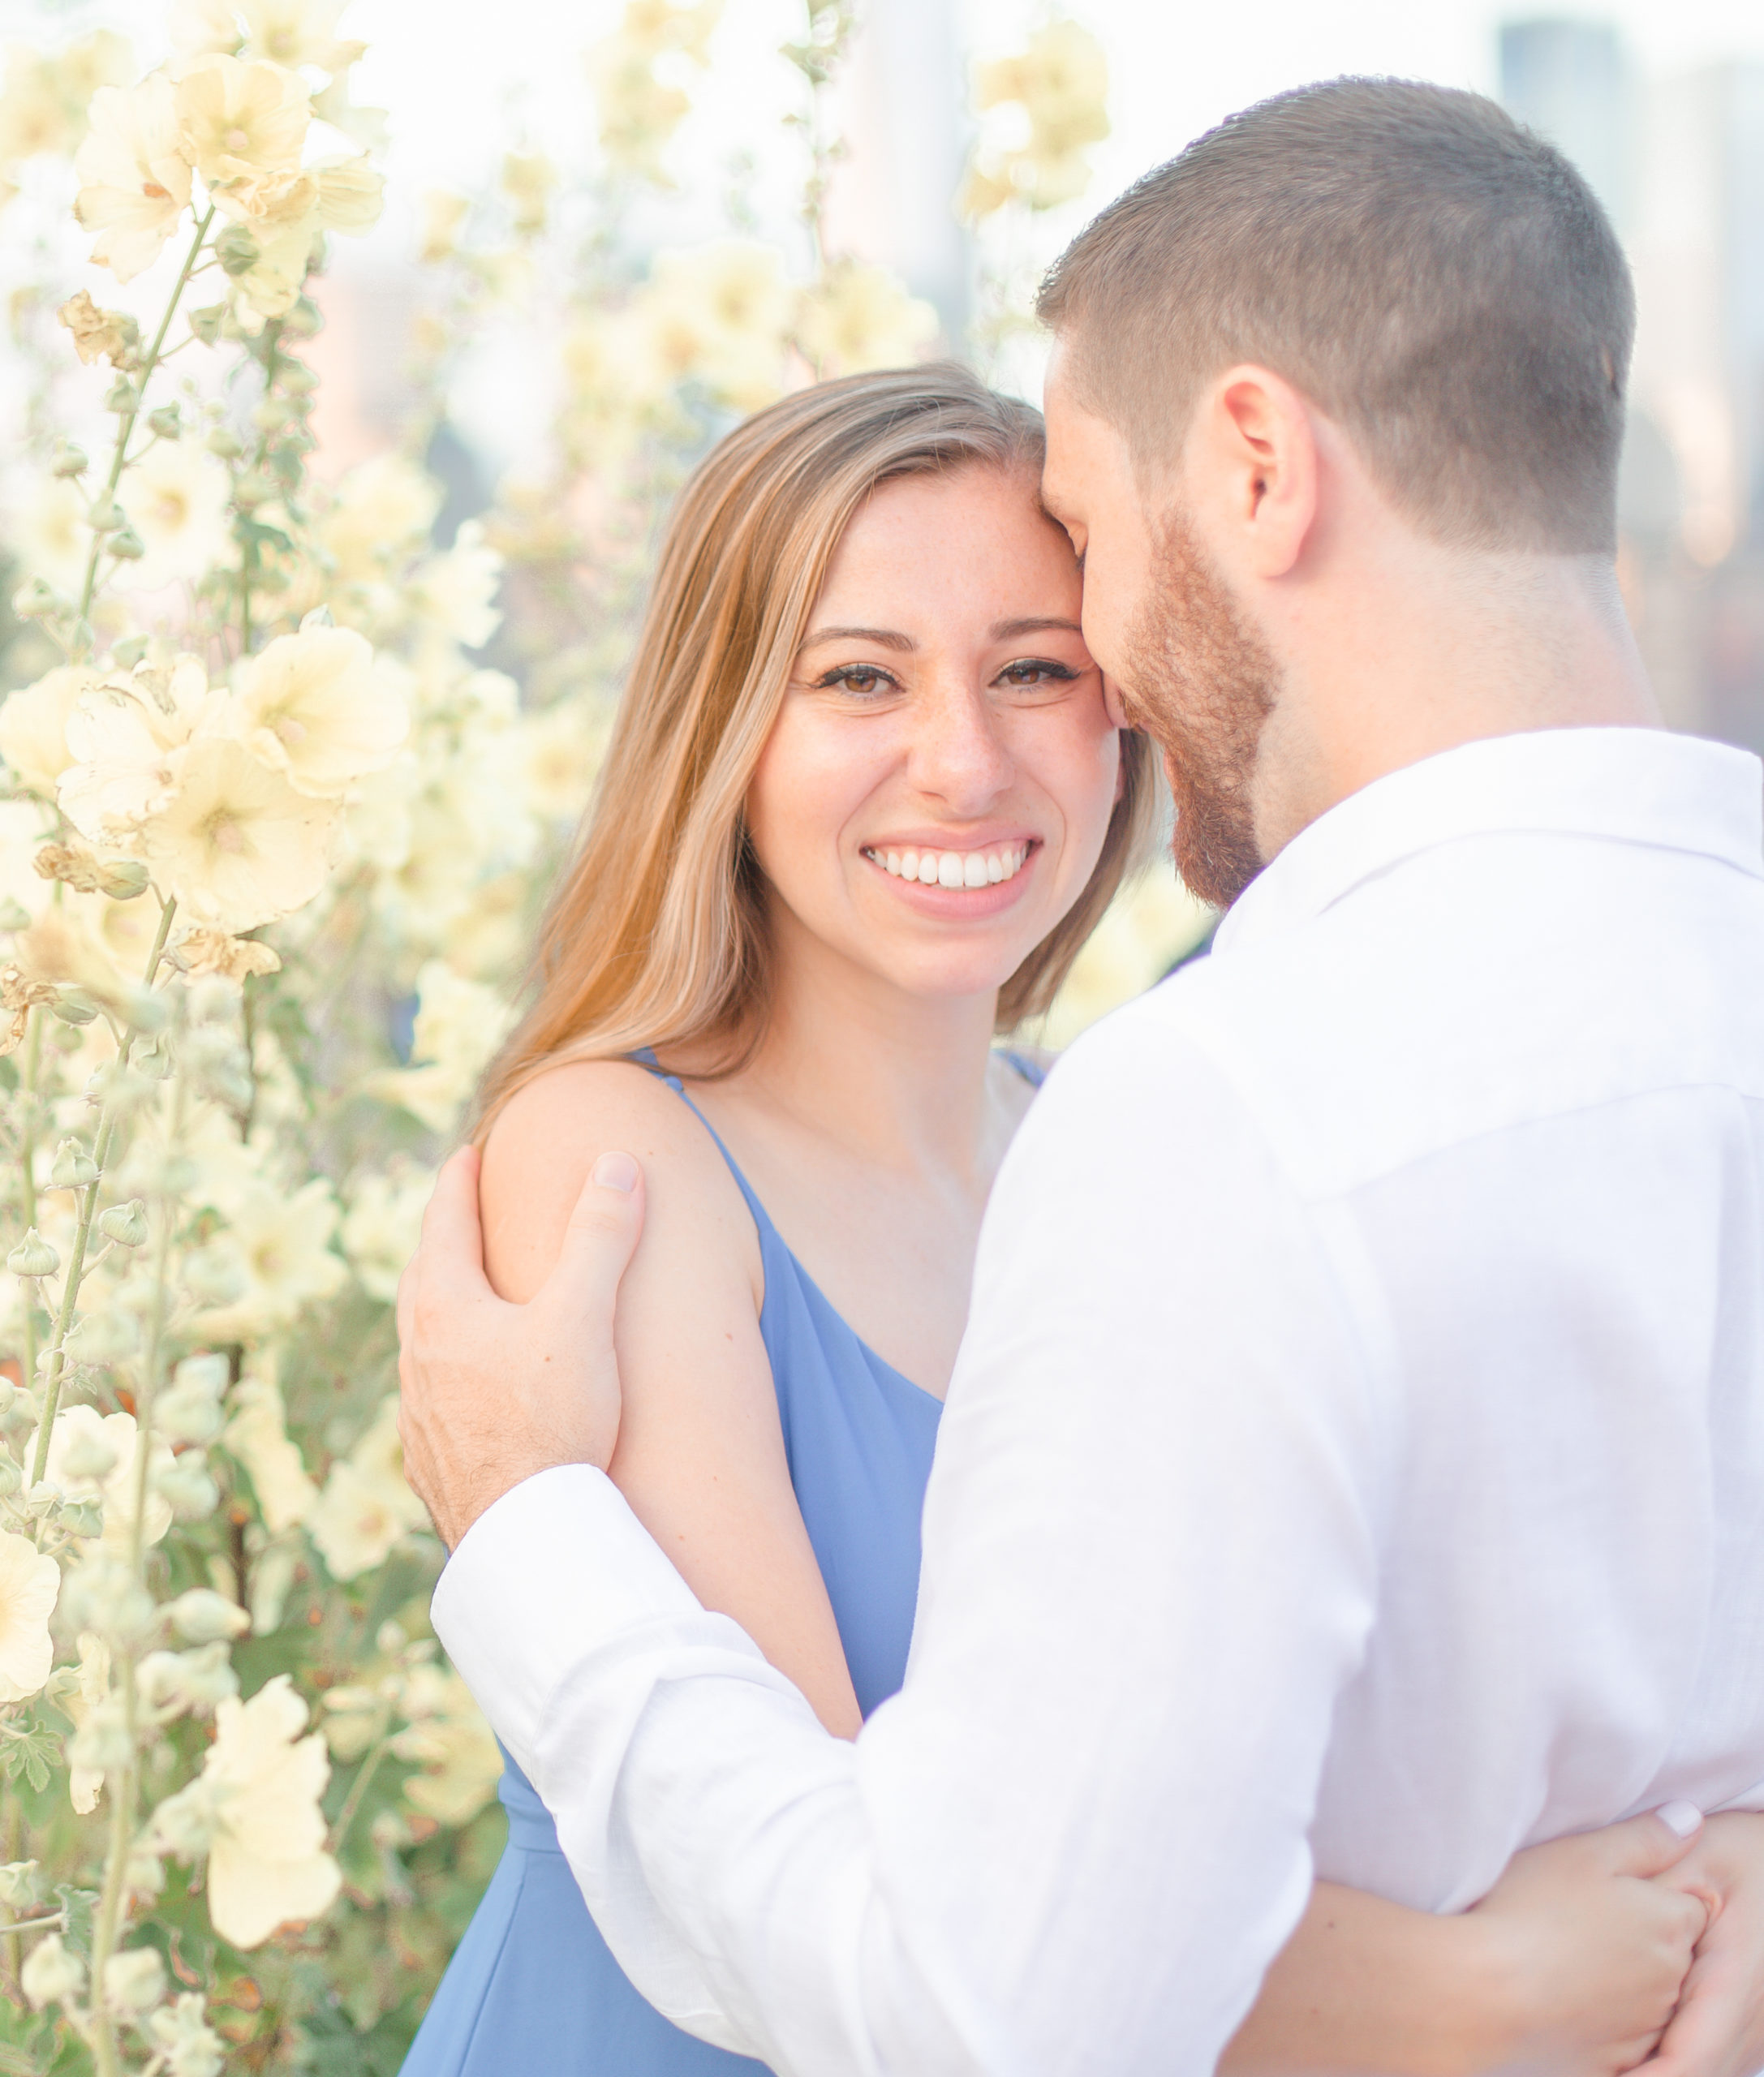 light and airy engagement photo at liberty state park